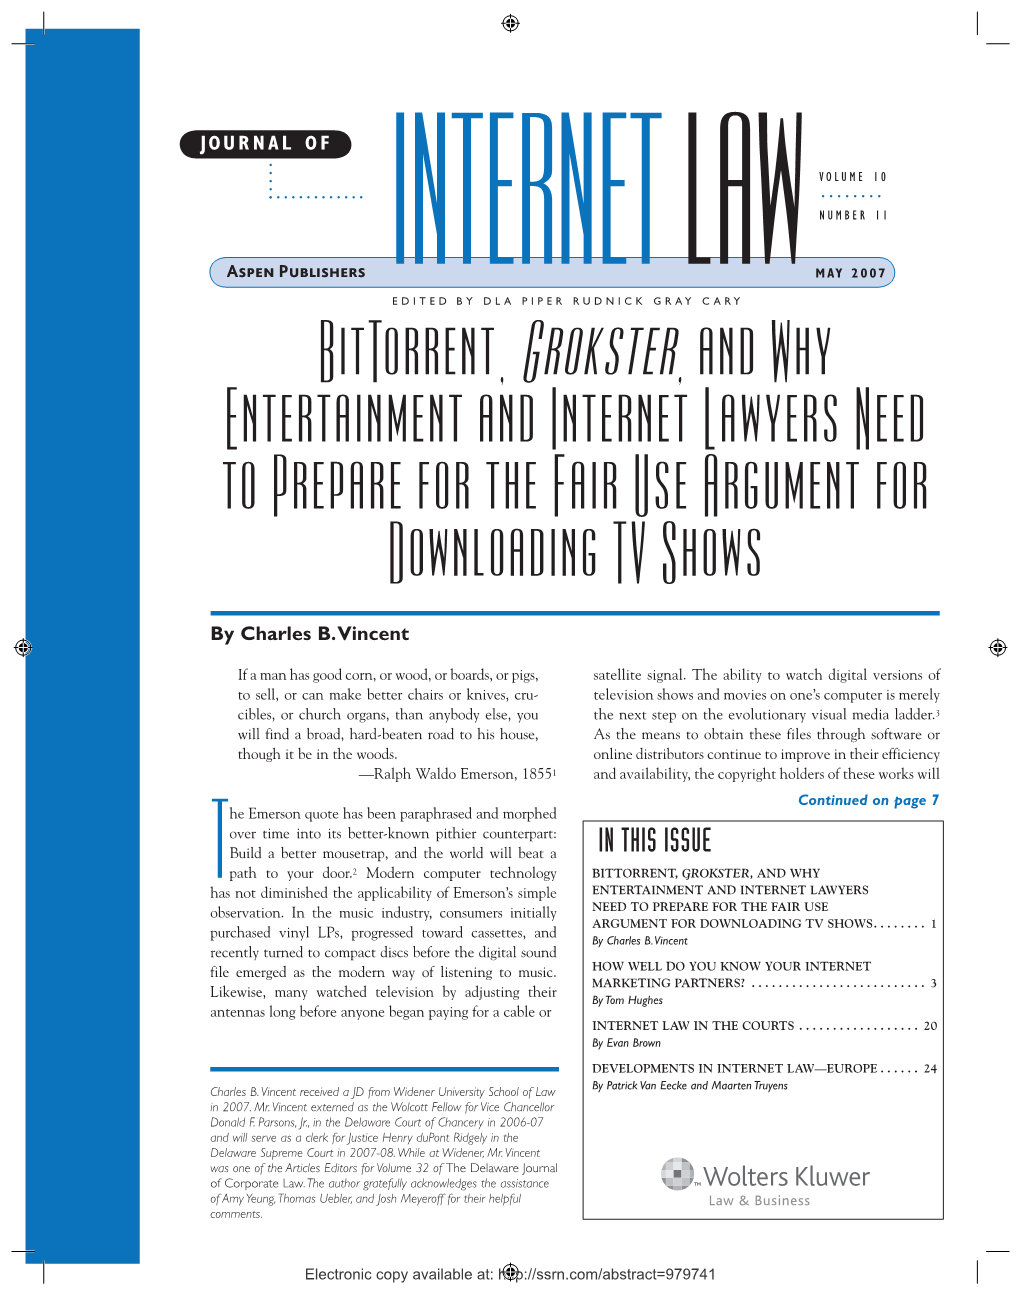 Bittorrent, Grokster , and Why Entertainment and Internet Lawyers